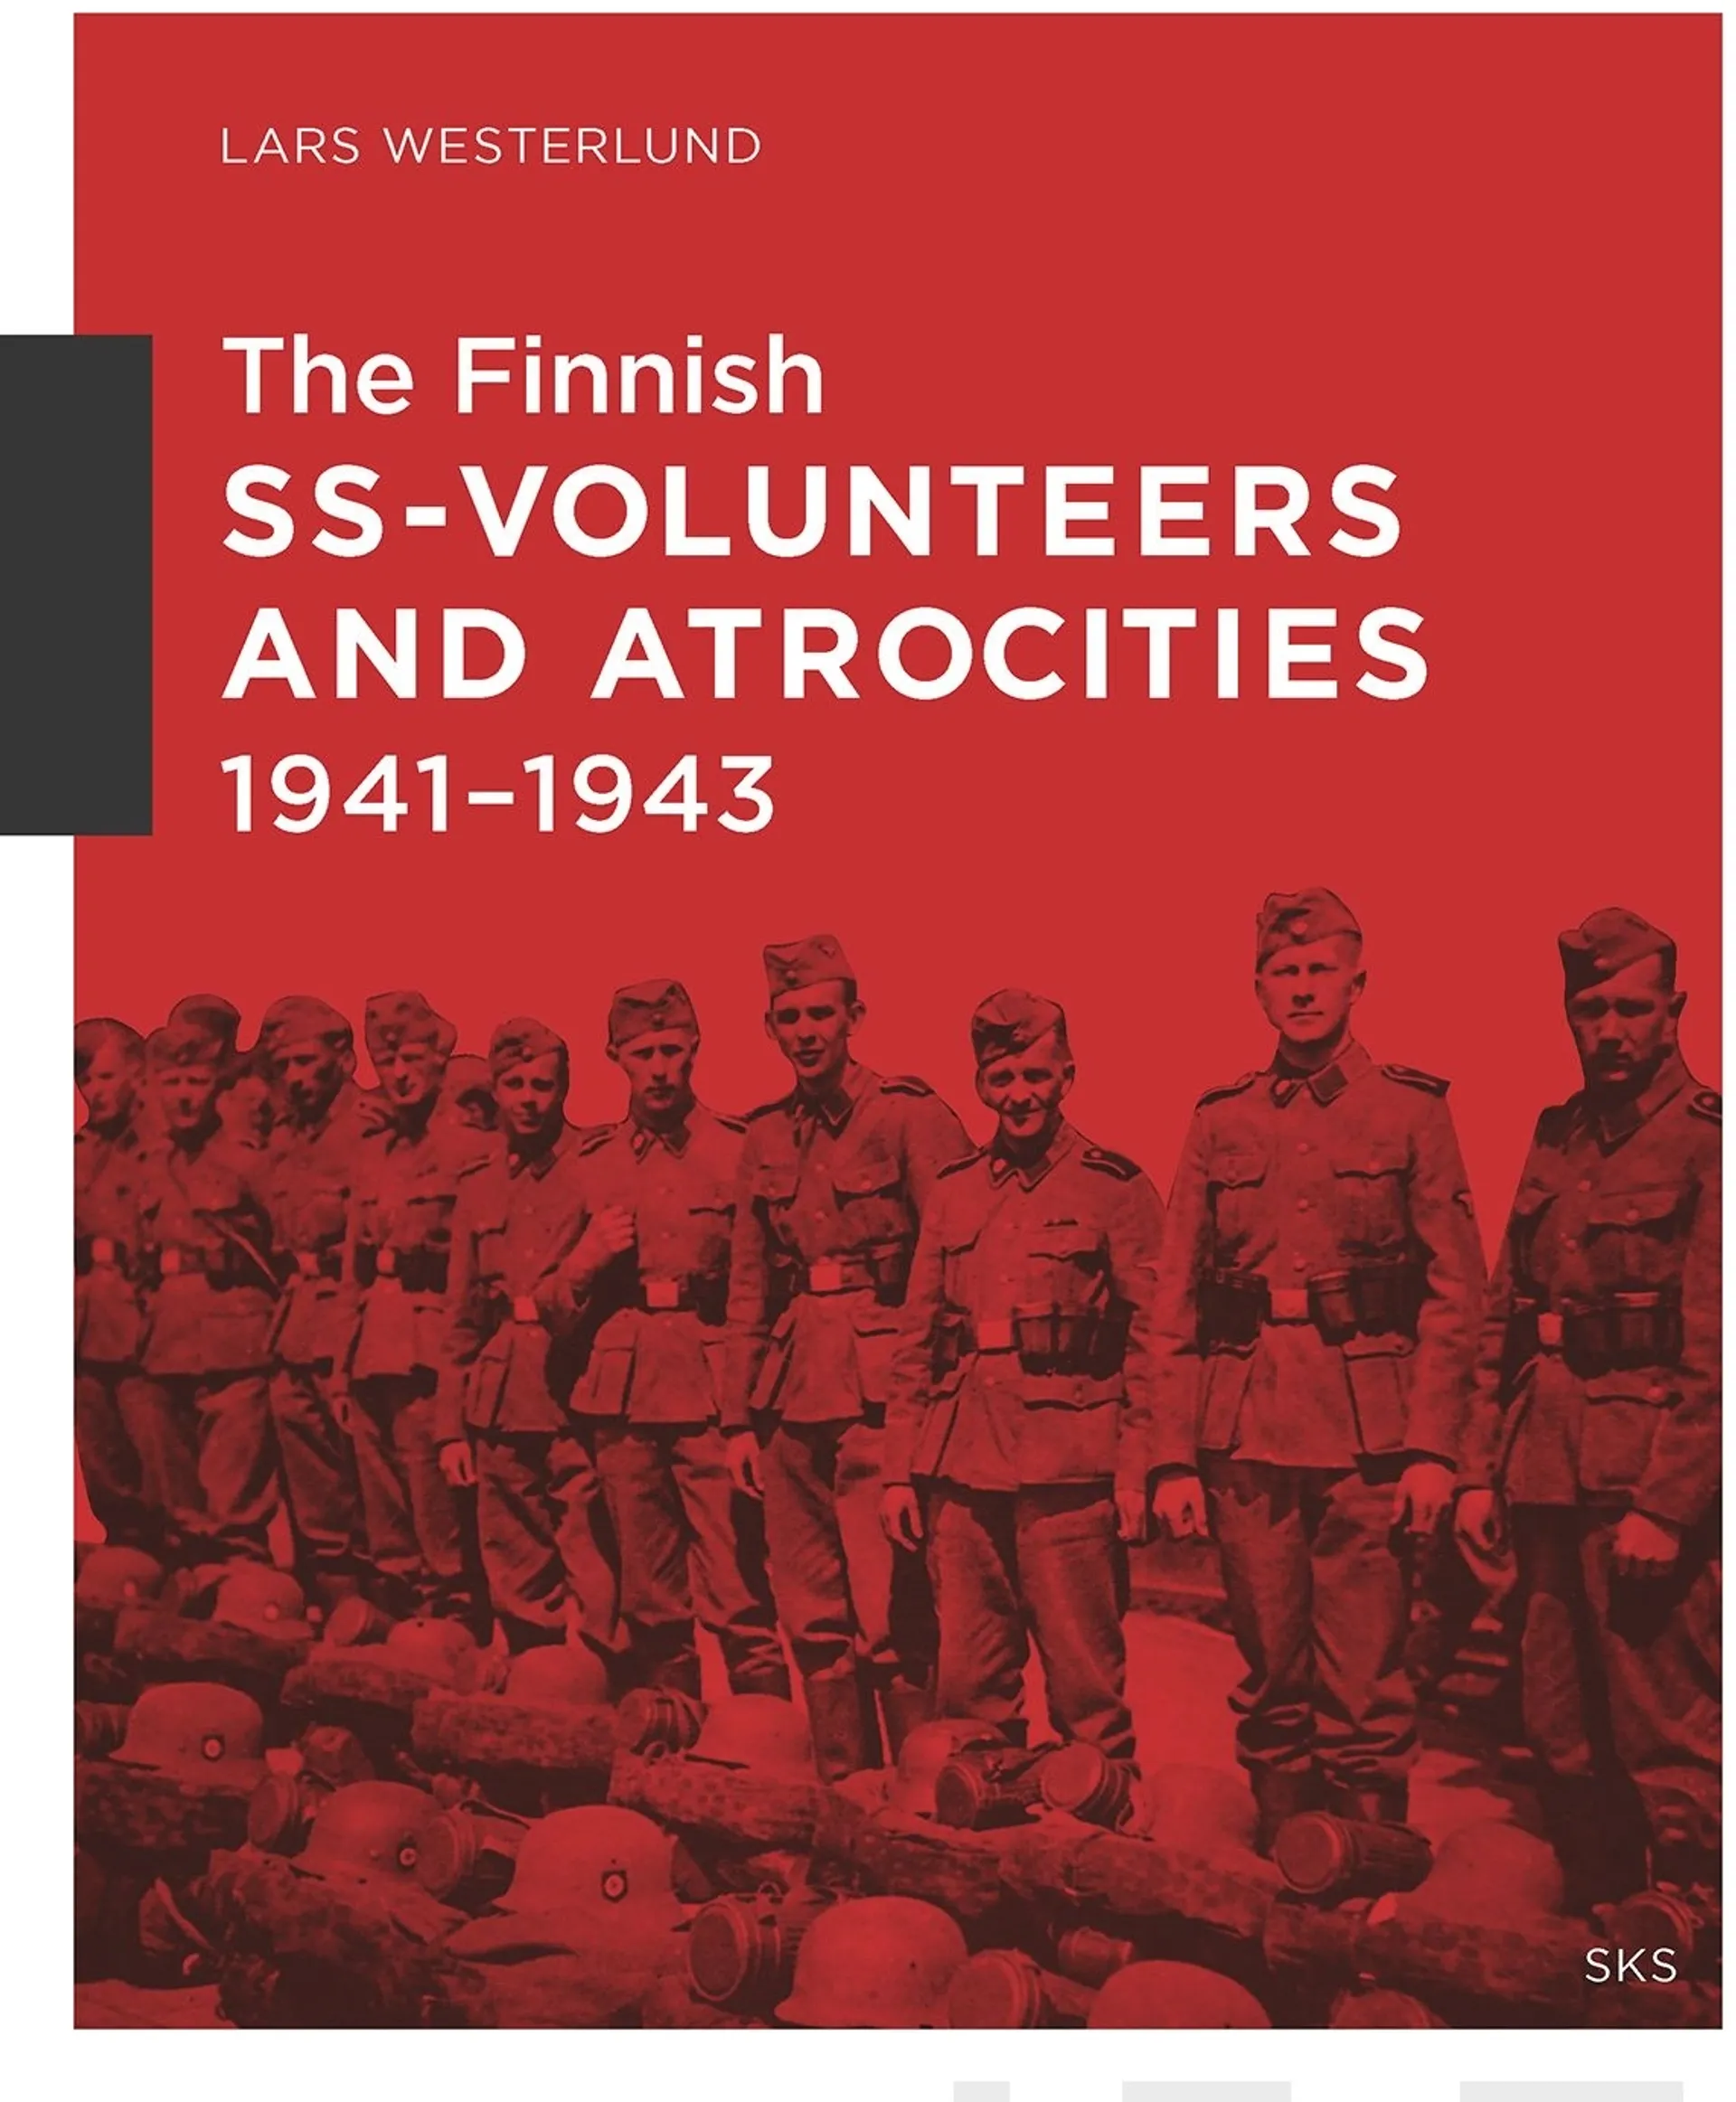 Westerlund, The Finnish SS-Volunteers and Atrocities 1941-1943